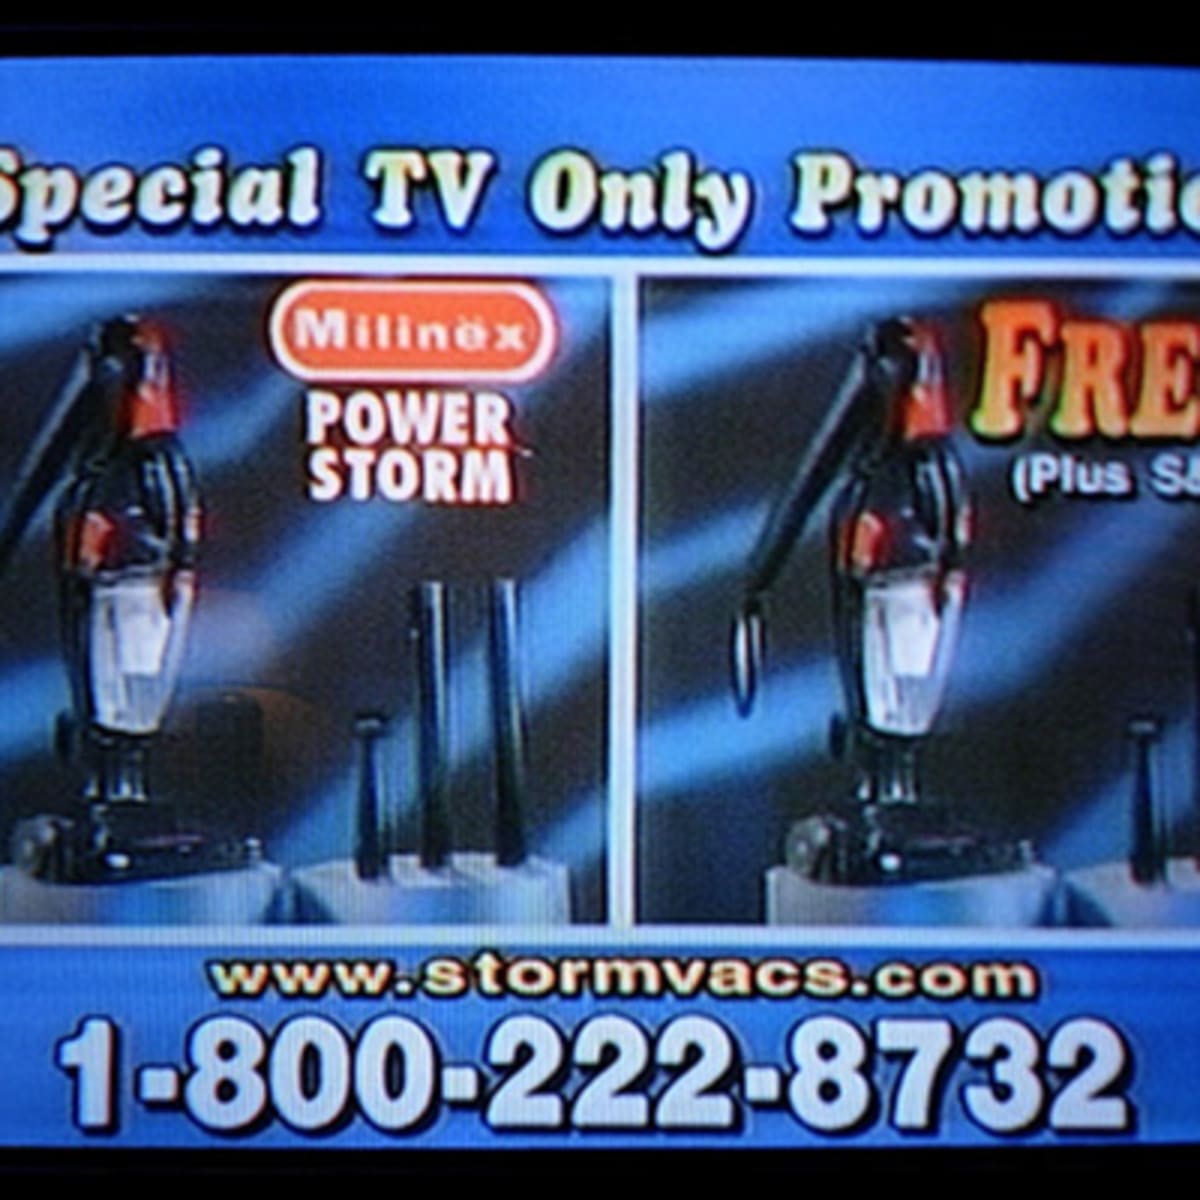 33 Hysterically Bad Infomercial Products You Need In Your Life